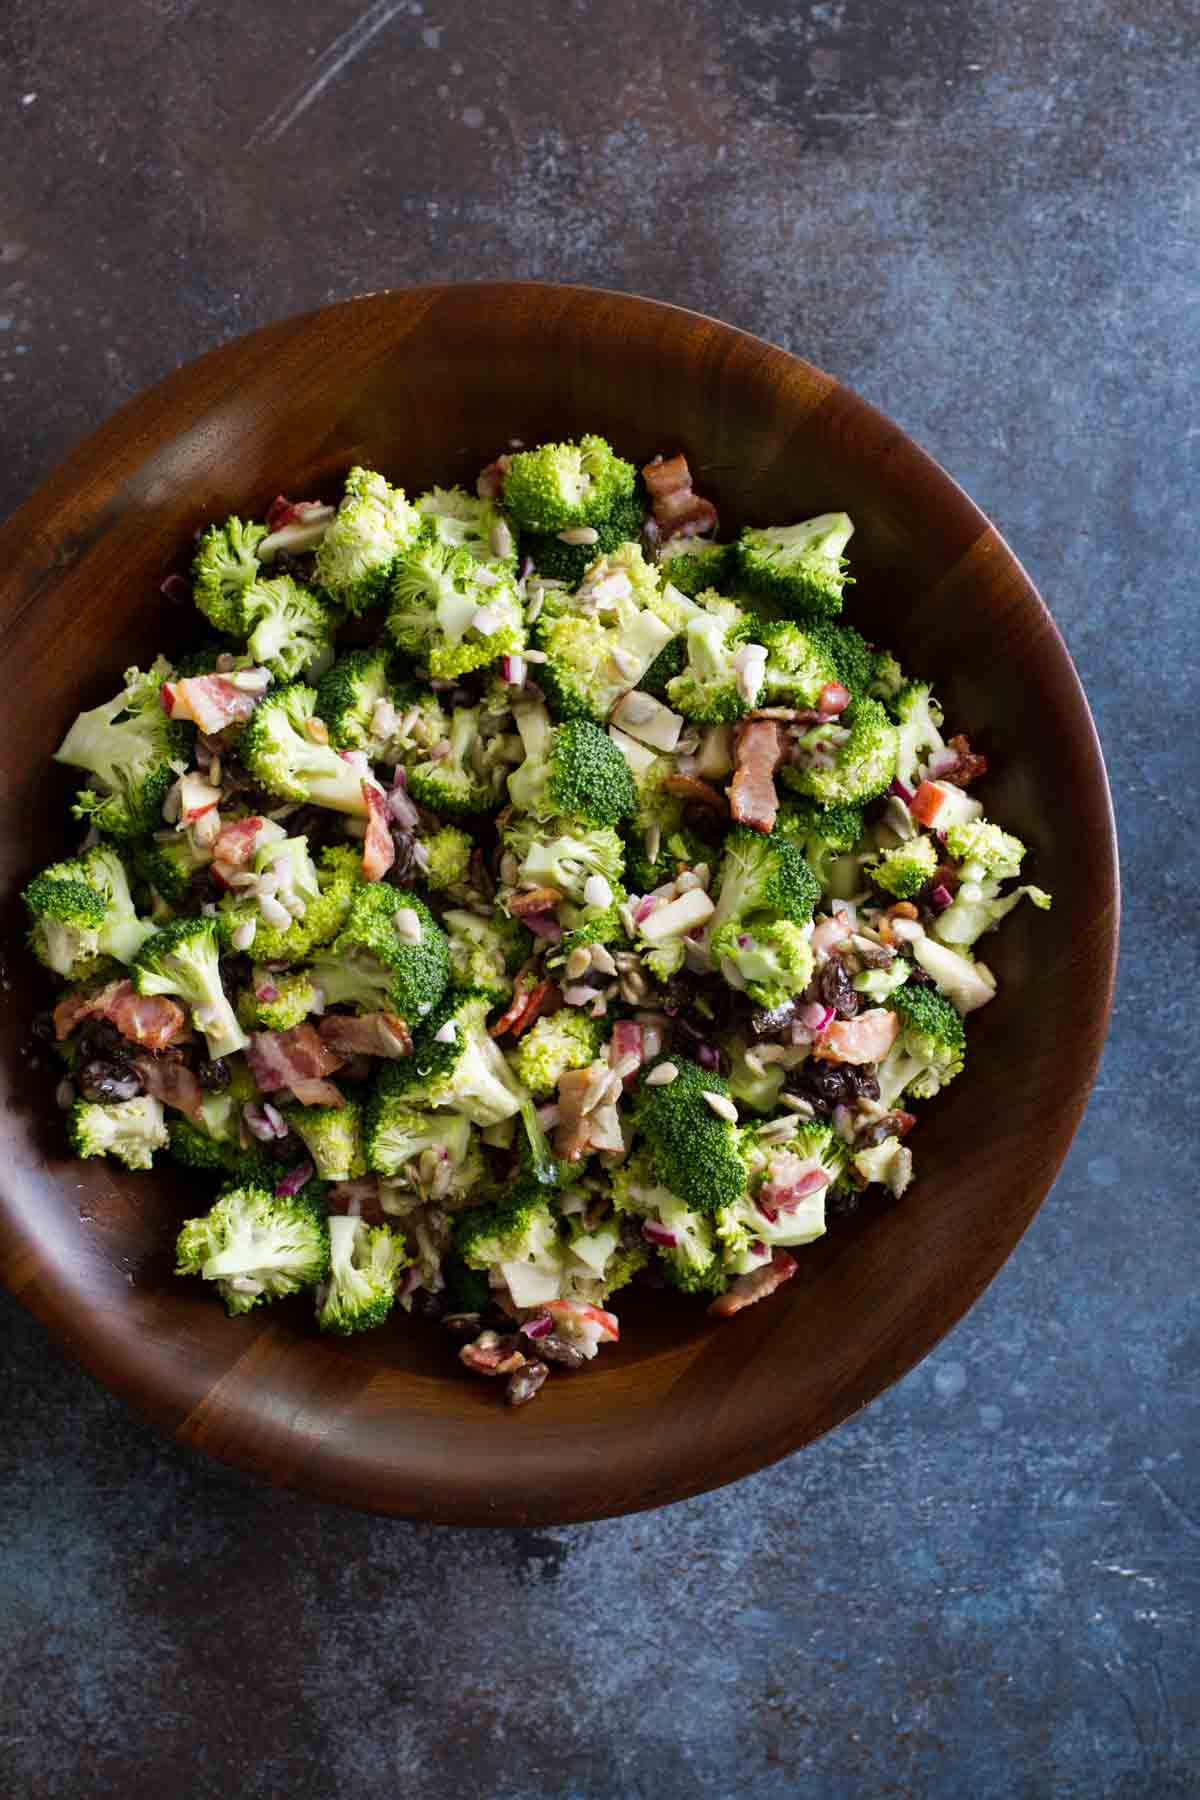 Broccoli salad with bacon, apples, and sunflower seeds